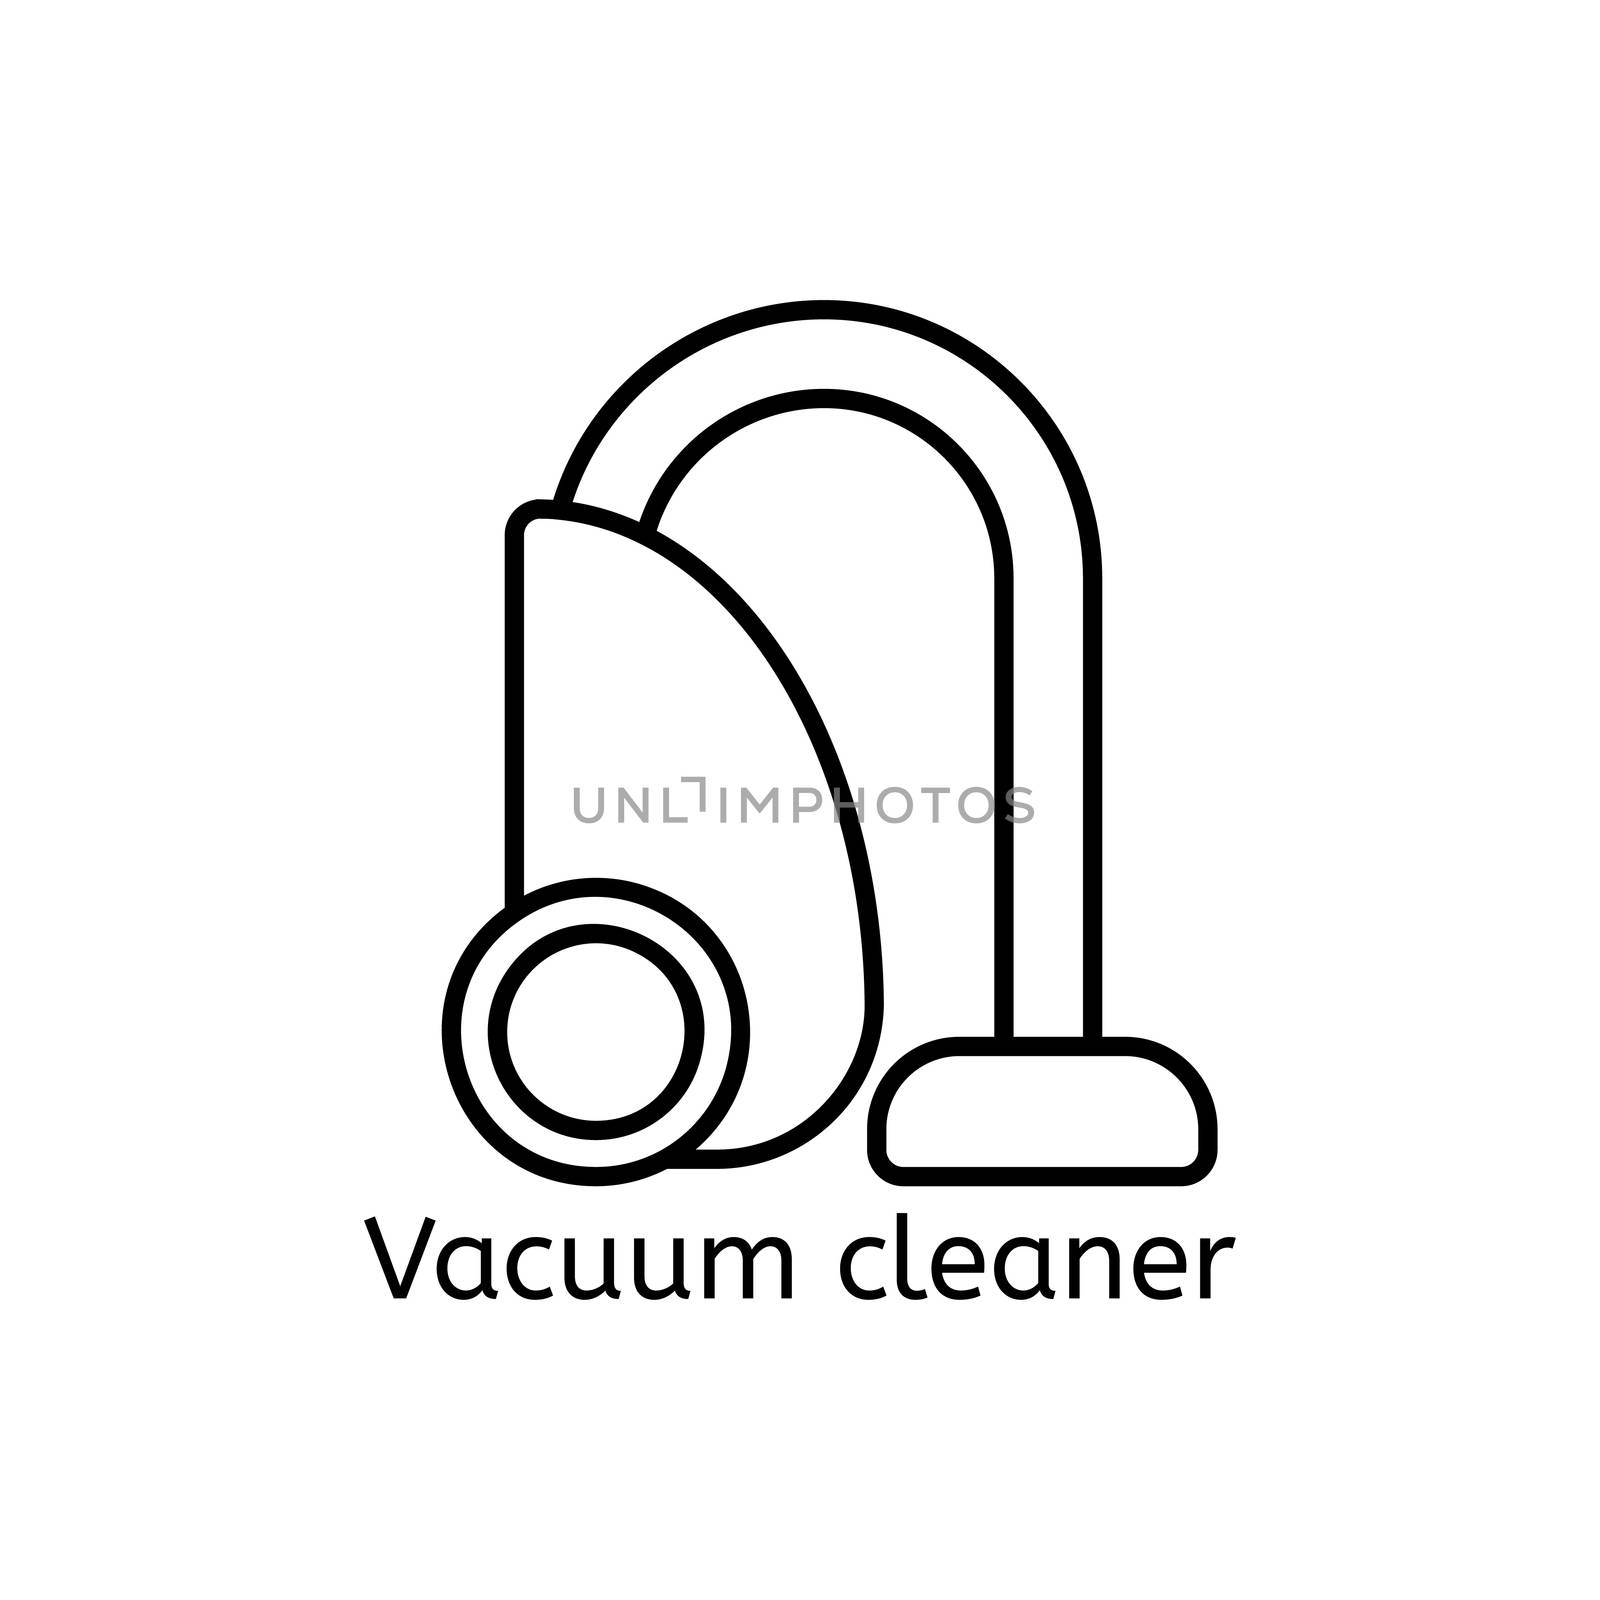 Vacuum cleaner simple line icon. Spring-cleaning thin linear signs. Clean simple concept for websites, infographic, mobile applications. by Elena_Garder